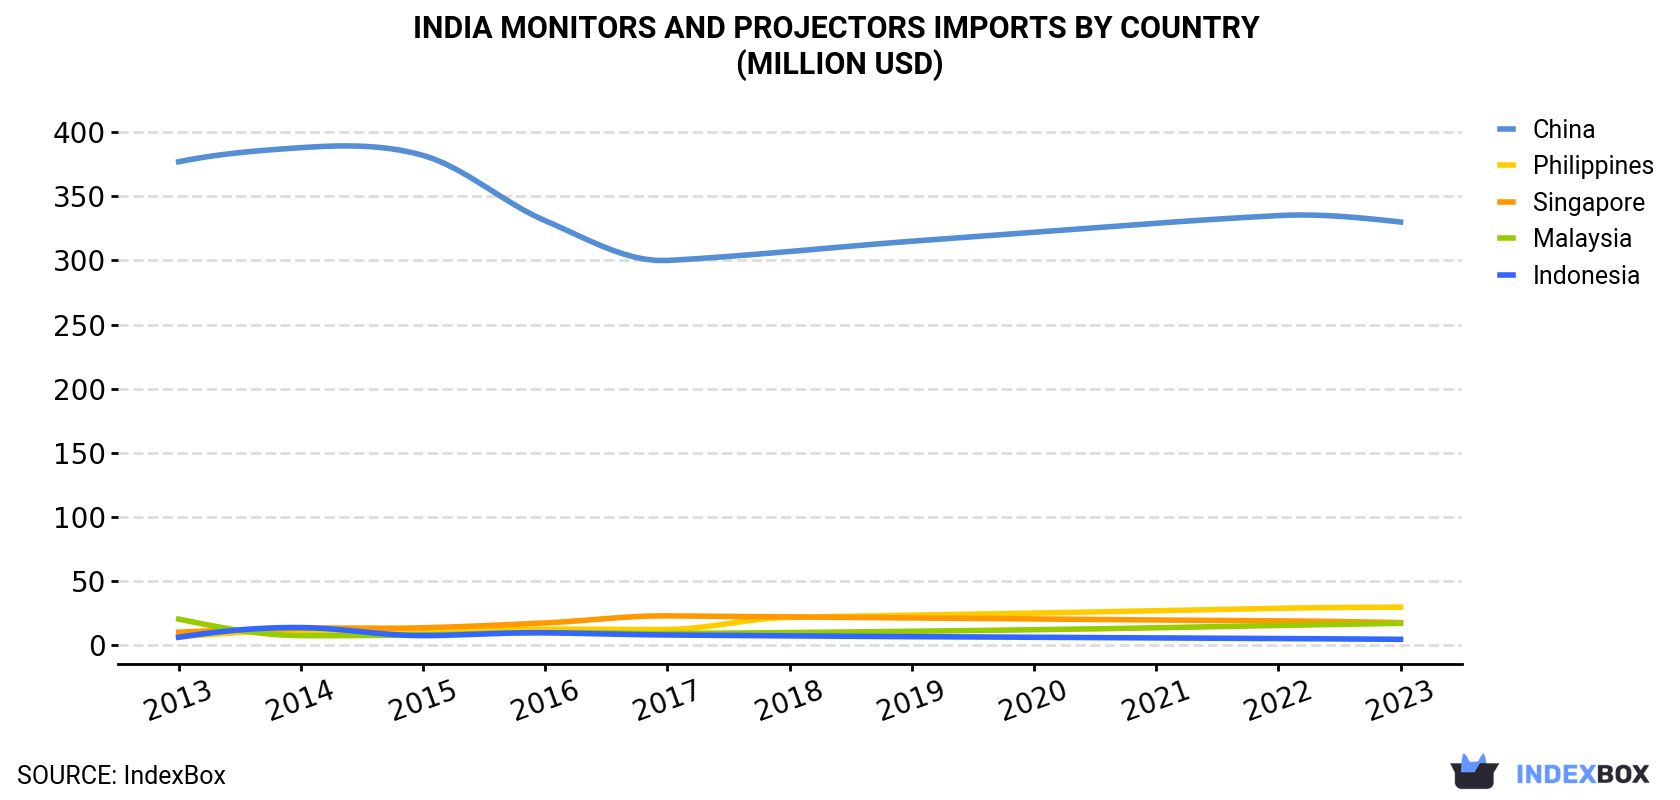 India Monitors And Projectors Imports By Country (Million USD)